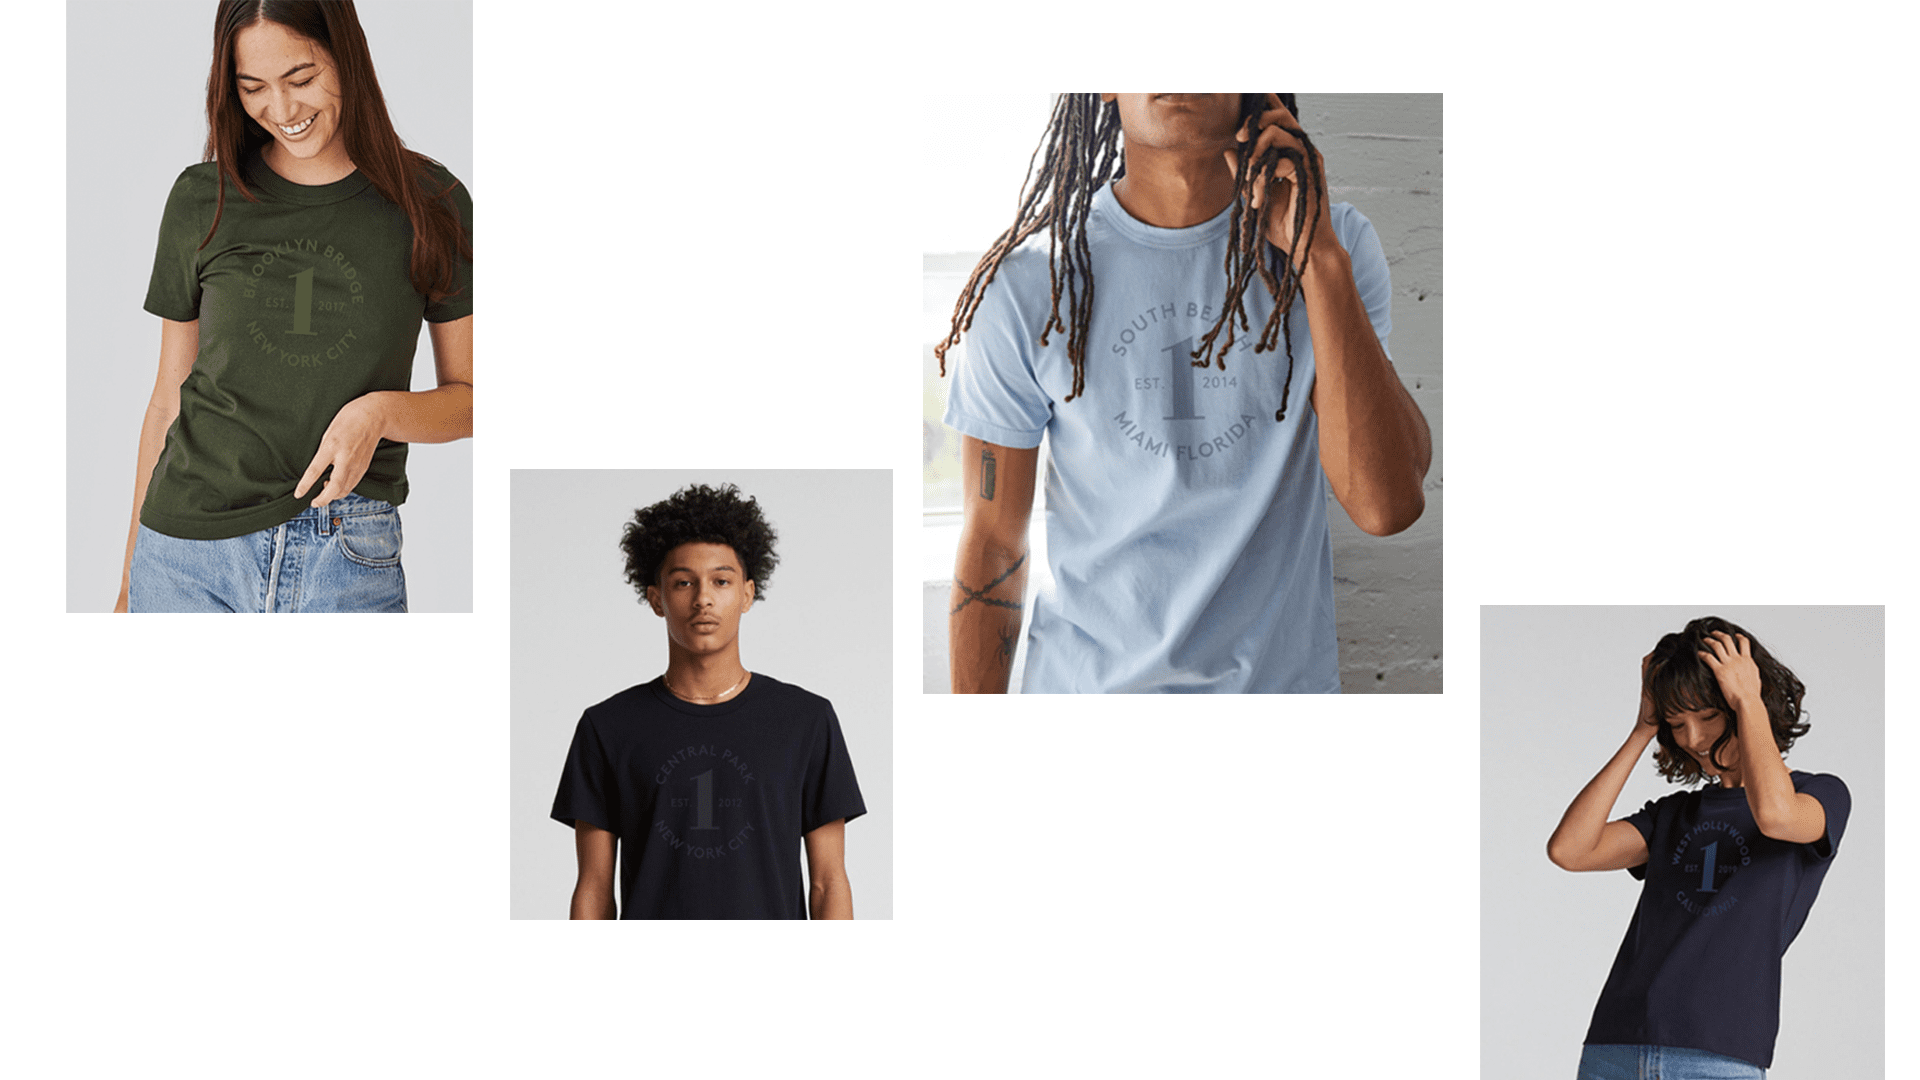 A collage of different men 's t-shirts with one man wearing a black shirt.